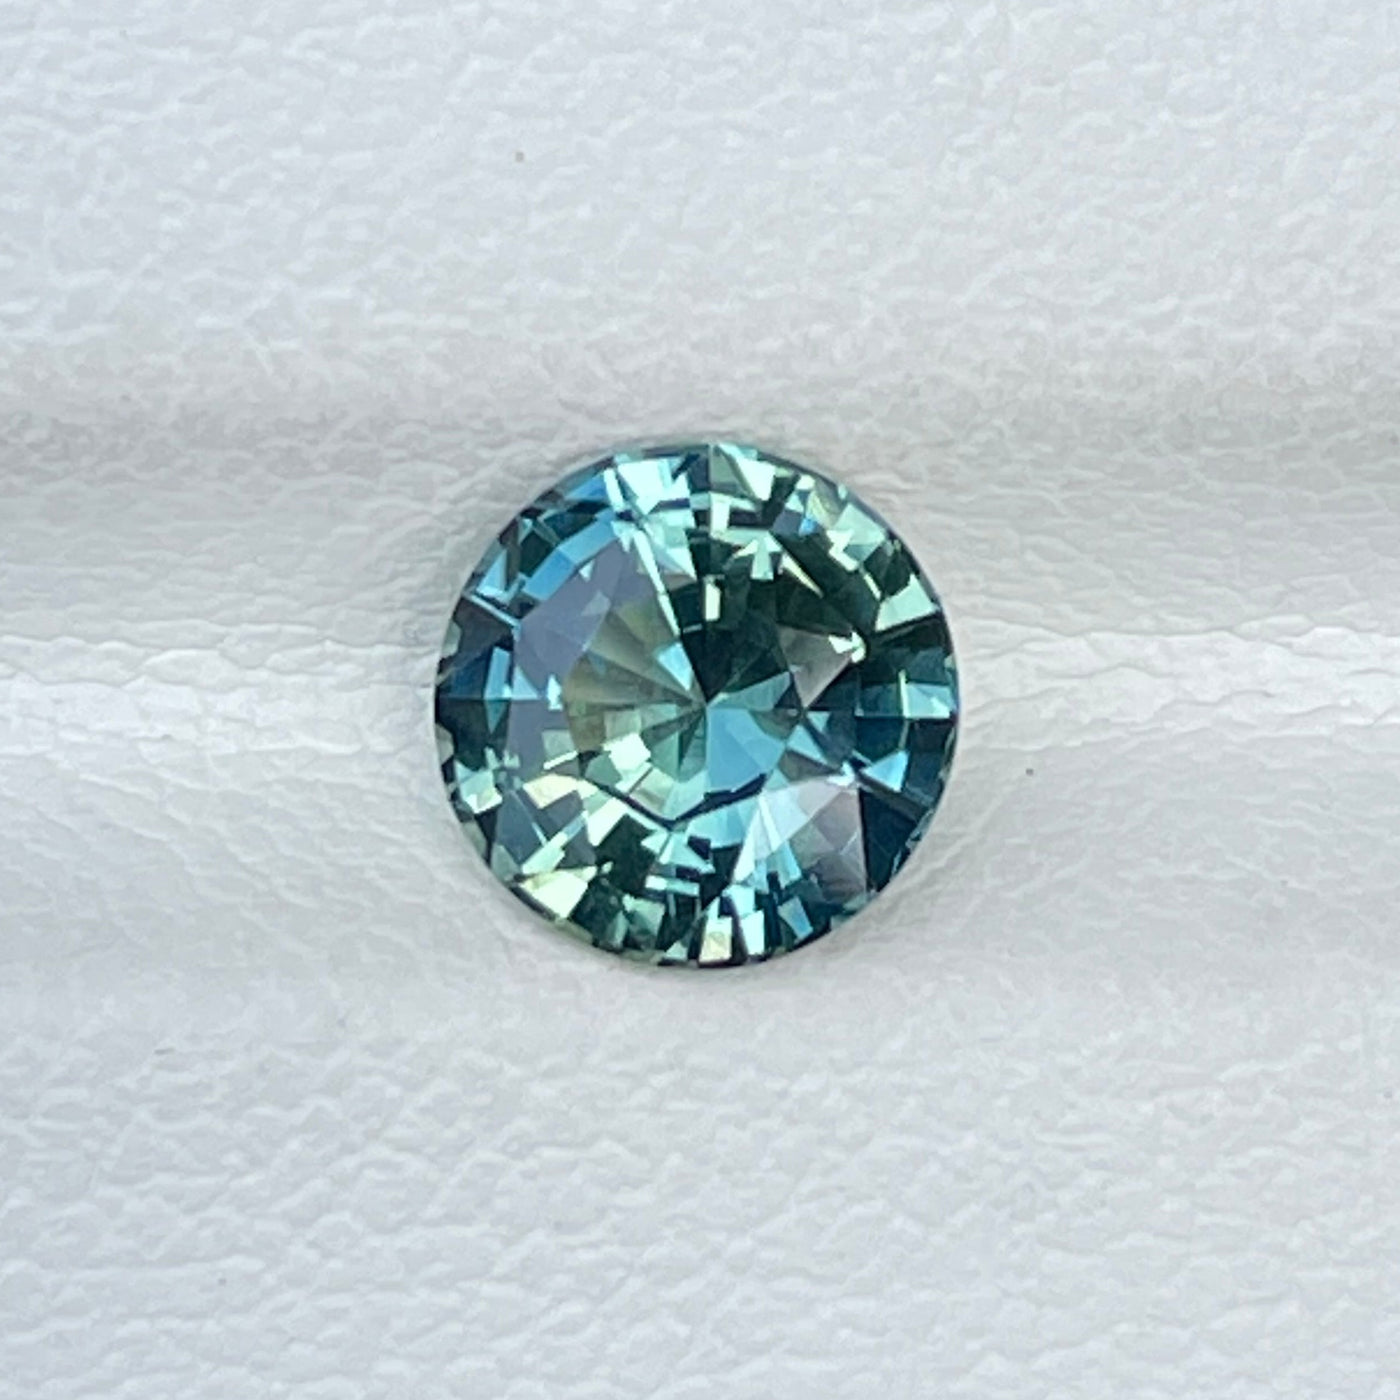 Bespoke fine unheated teal sapphire for bespoke engagement ring 